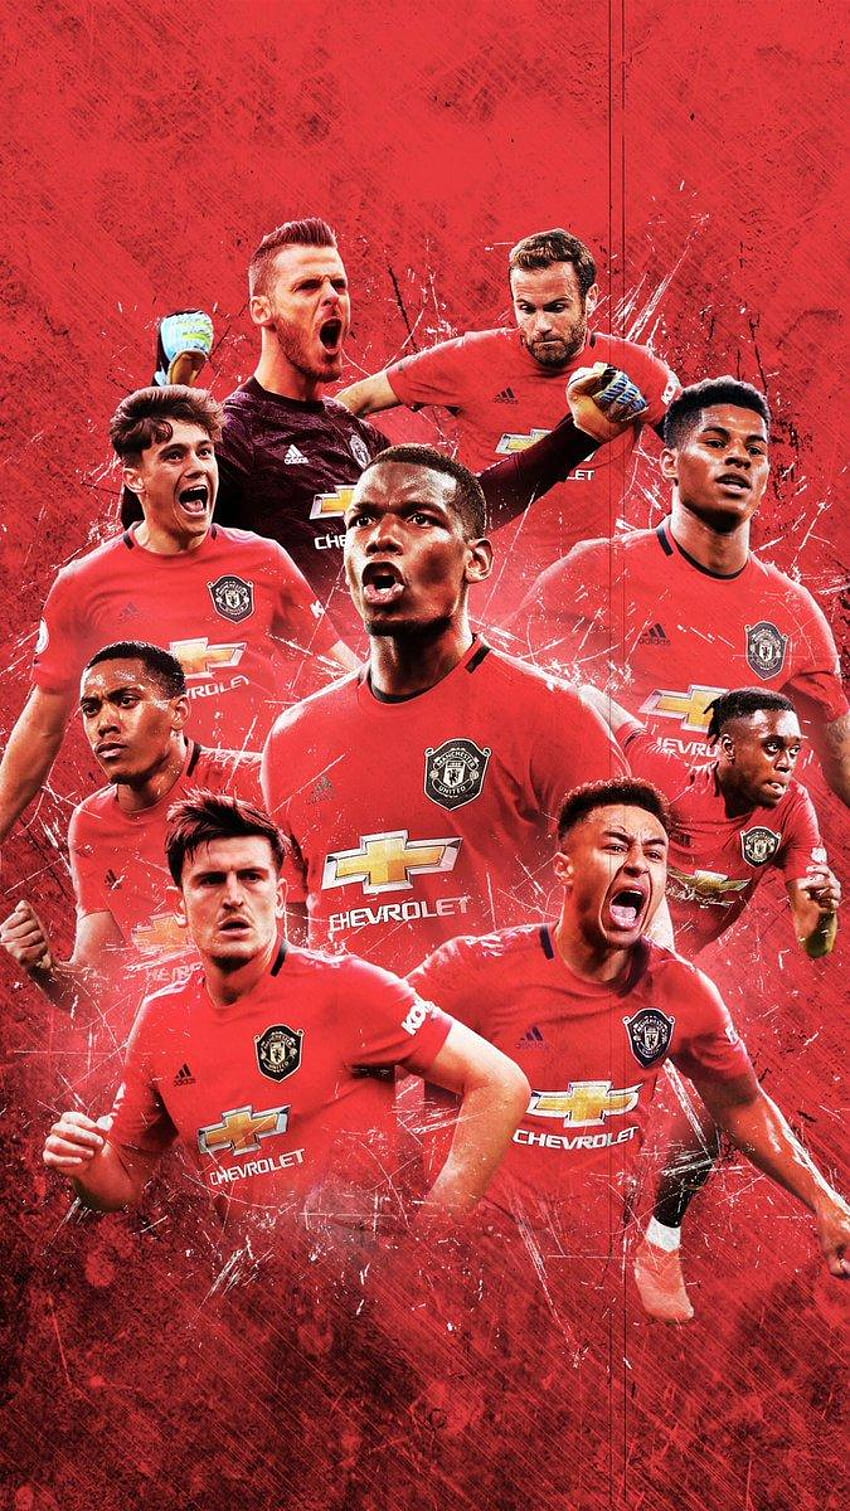 Manchester United F.C. Poster Wallpaper, HD Sports 4K Wallpapers, Images  and Background - Wallpapers Den